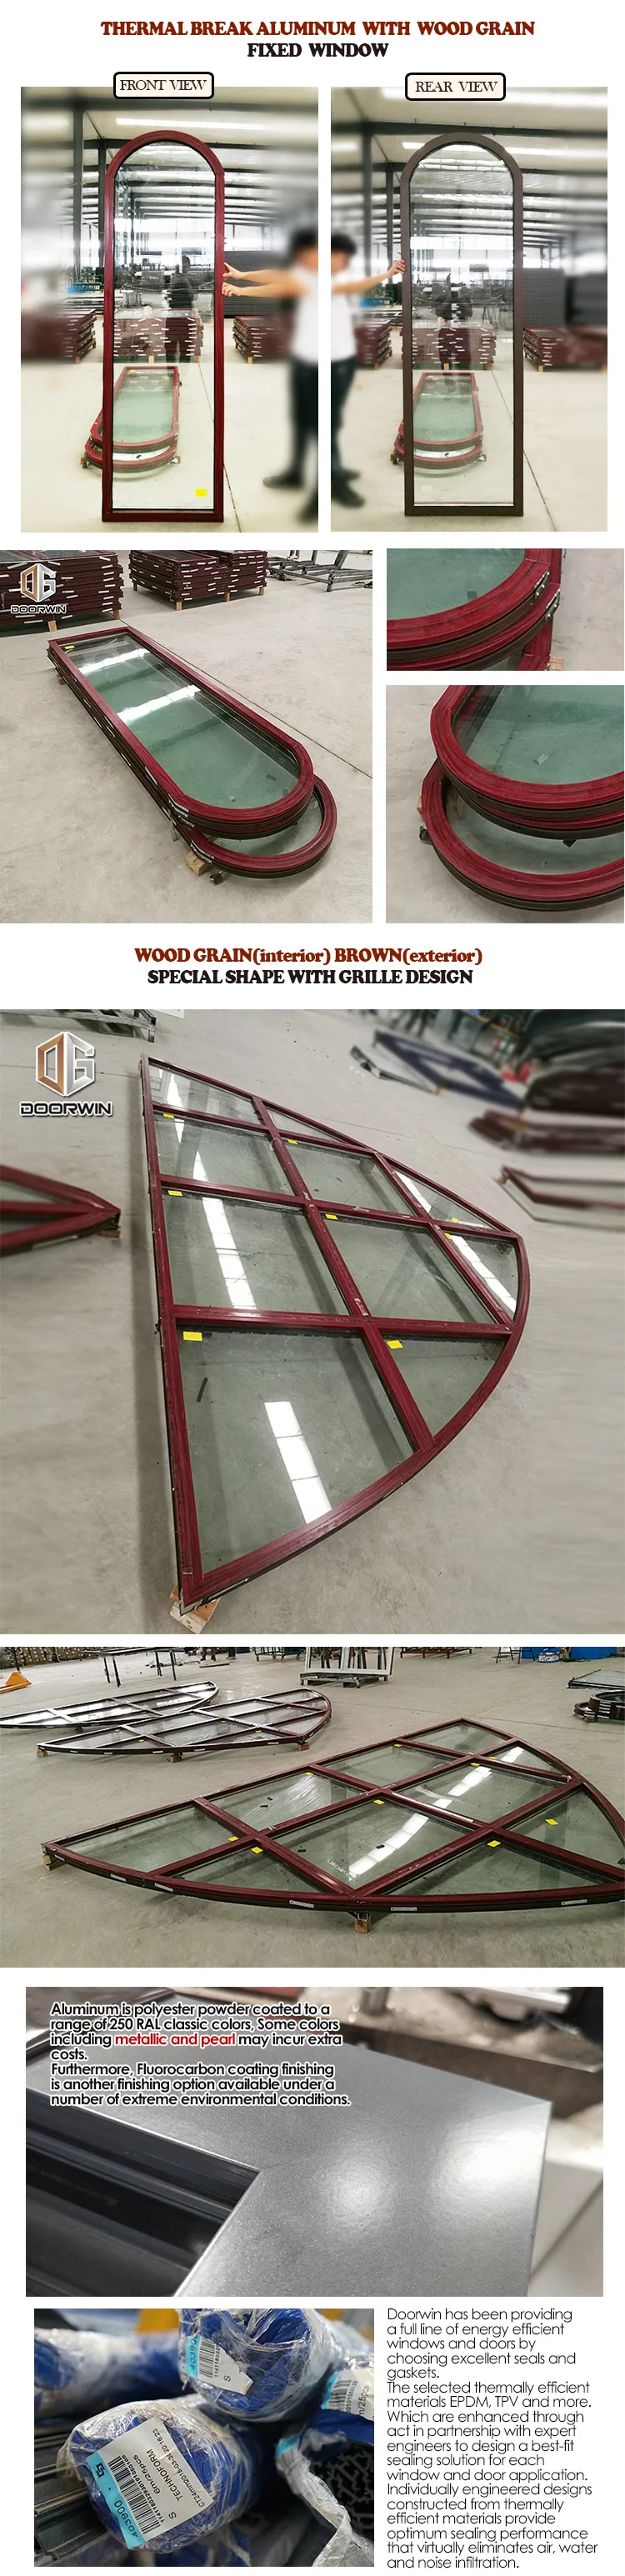 special shape Brown anodized aluminum windows with built in shutter